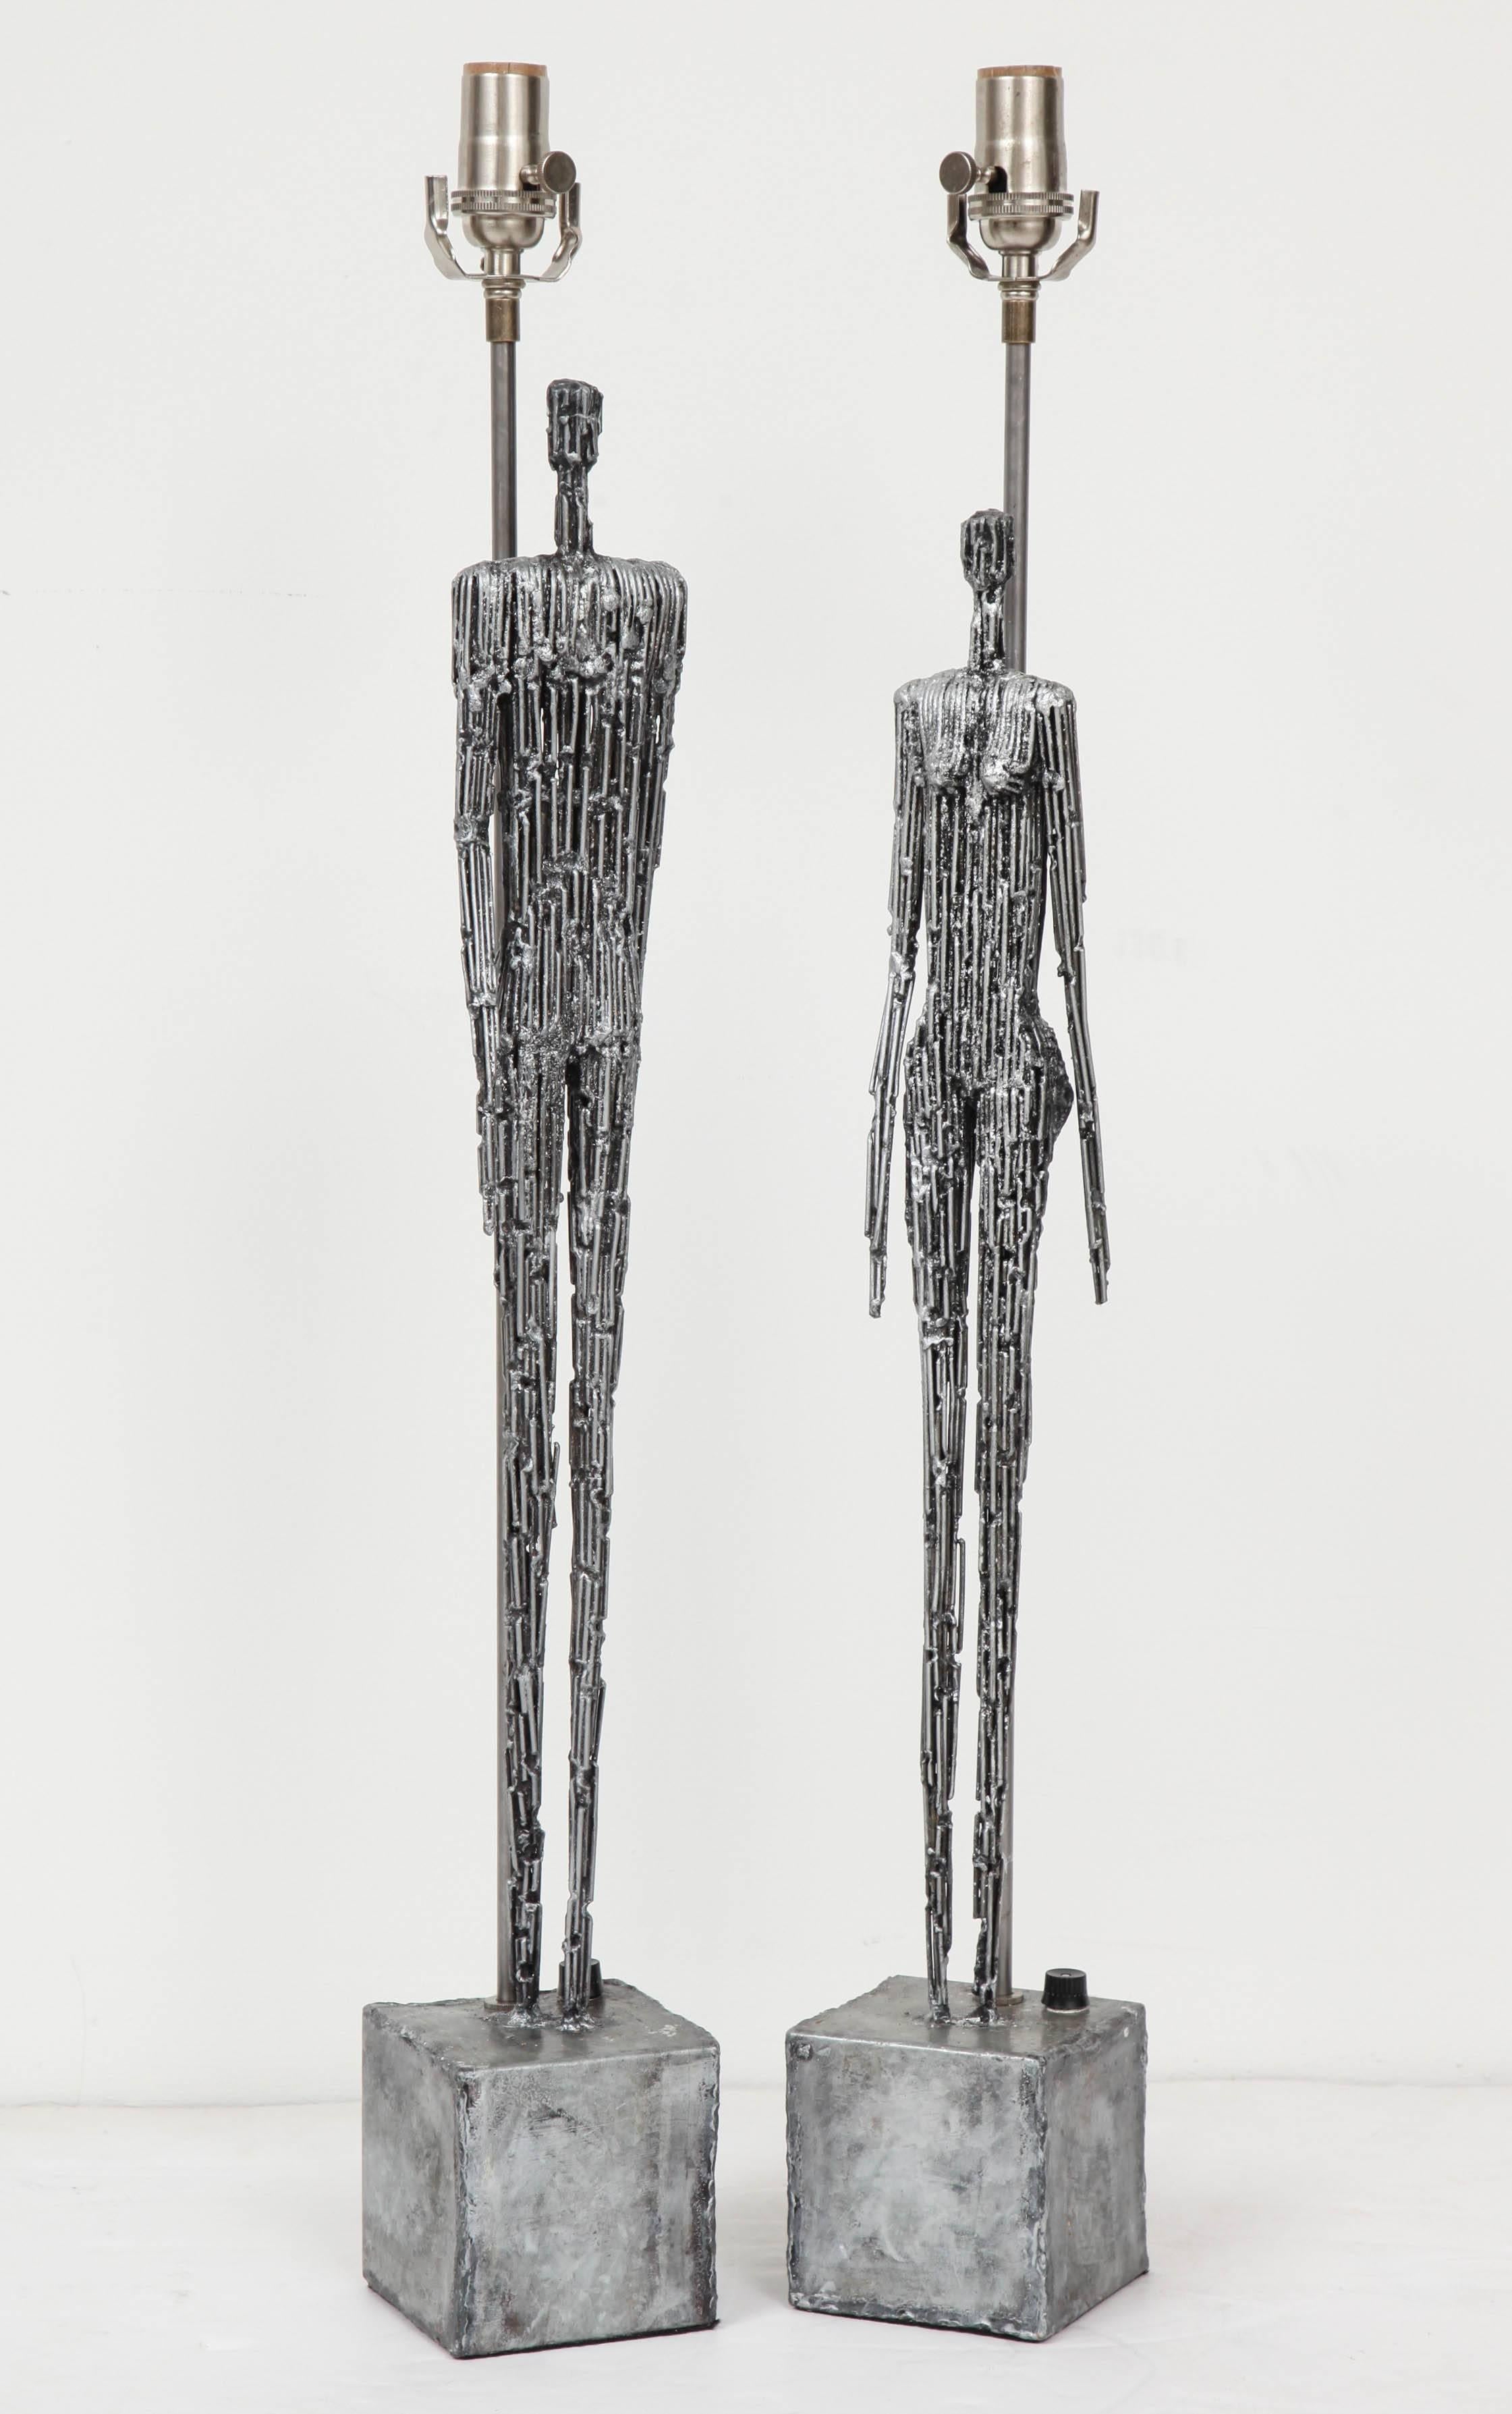 Decorative pair of lamps of a couple, C 1950. Lamps are made of nails and plated in nickel.